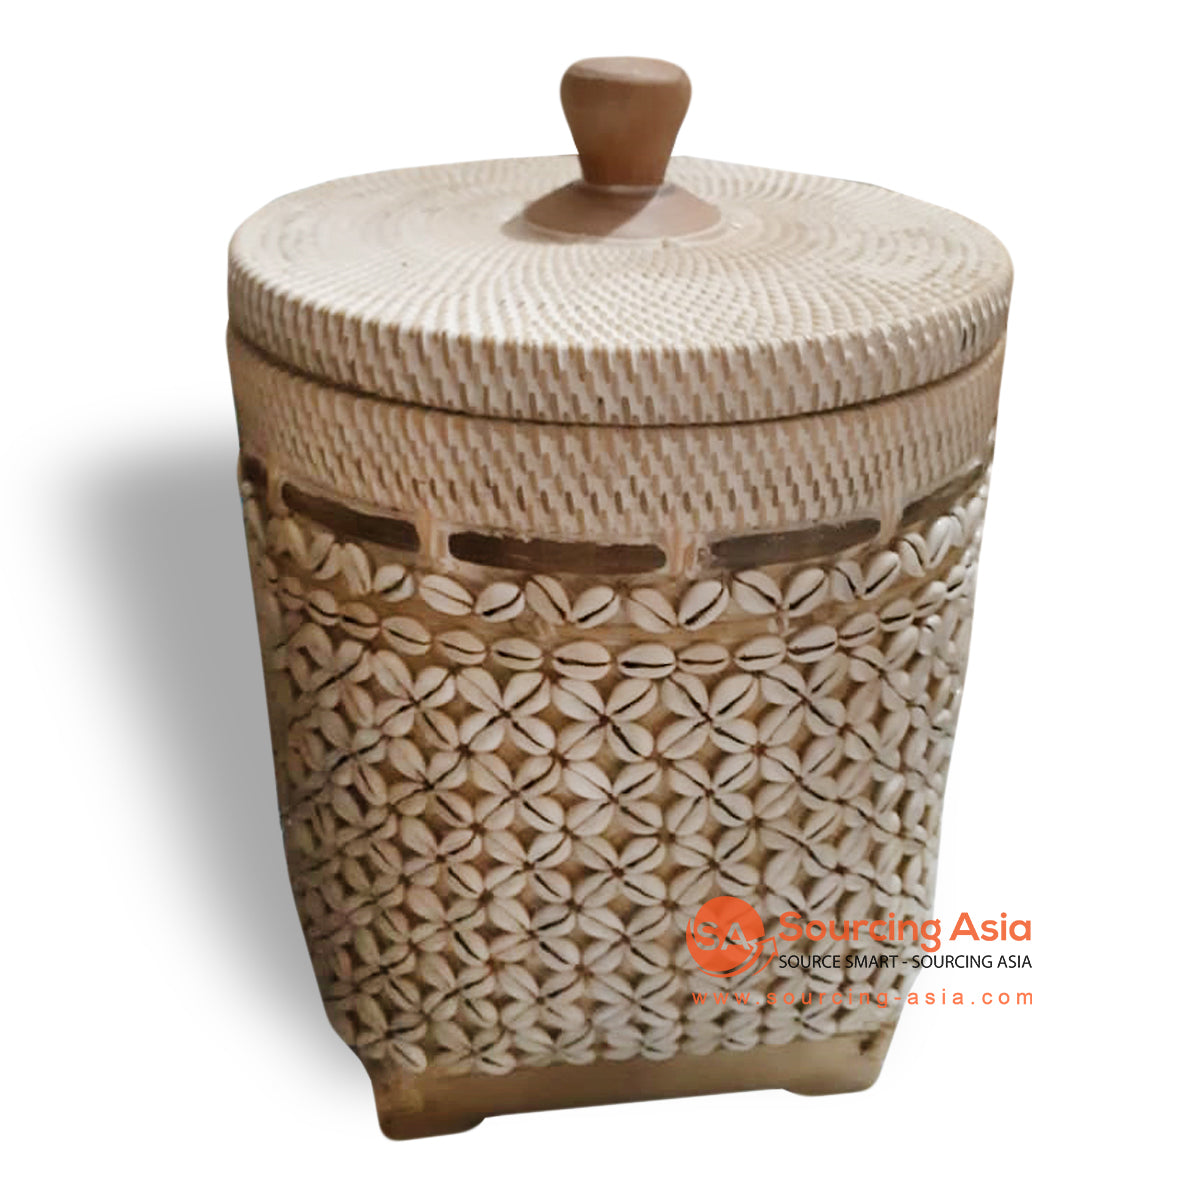 ALI071 NATURAL WOVEN RATTAN BASKET WITH SHELL ORNAMENT AND LID